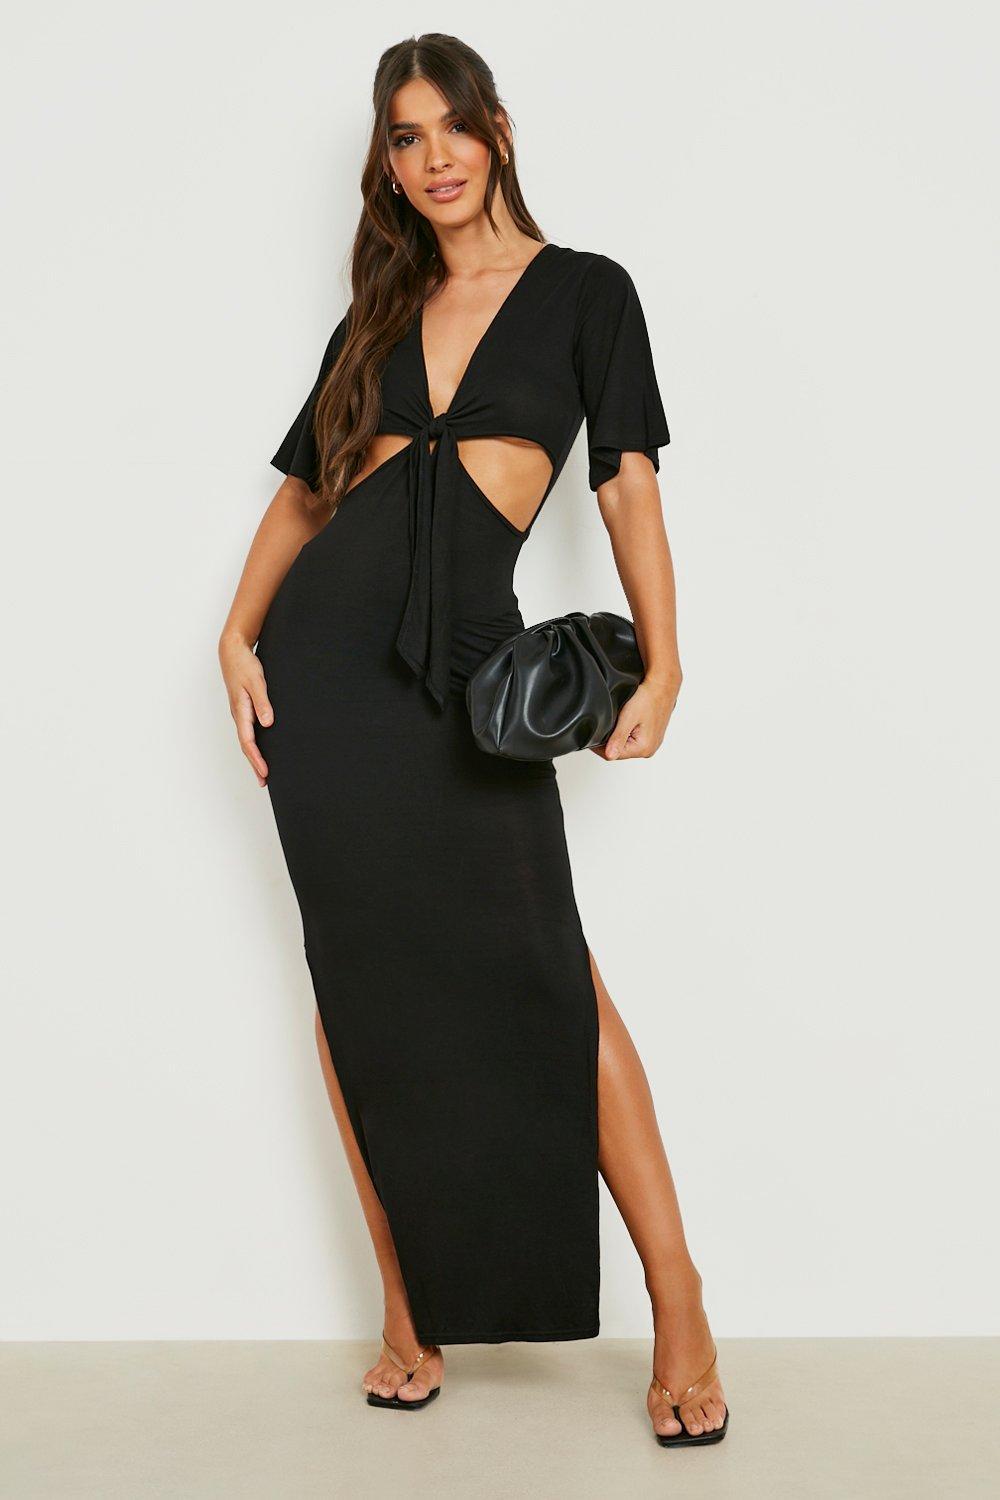 Boohoo Cut Out Tie Front Maxi Dress in Black